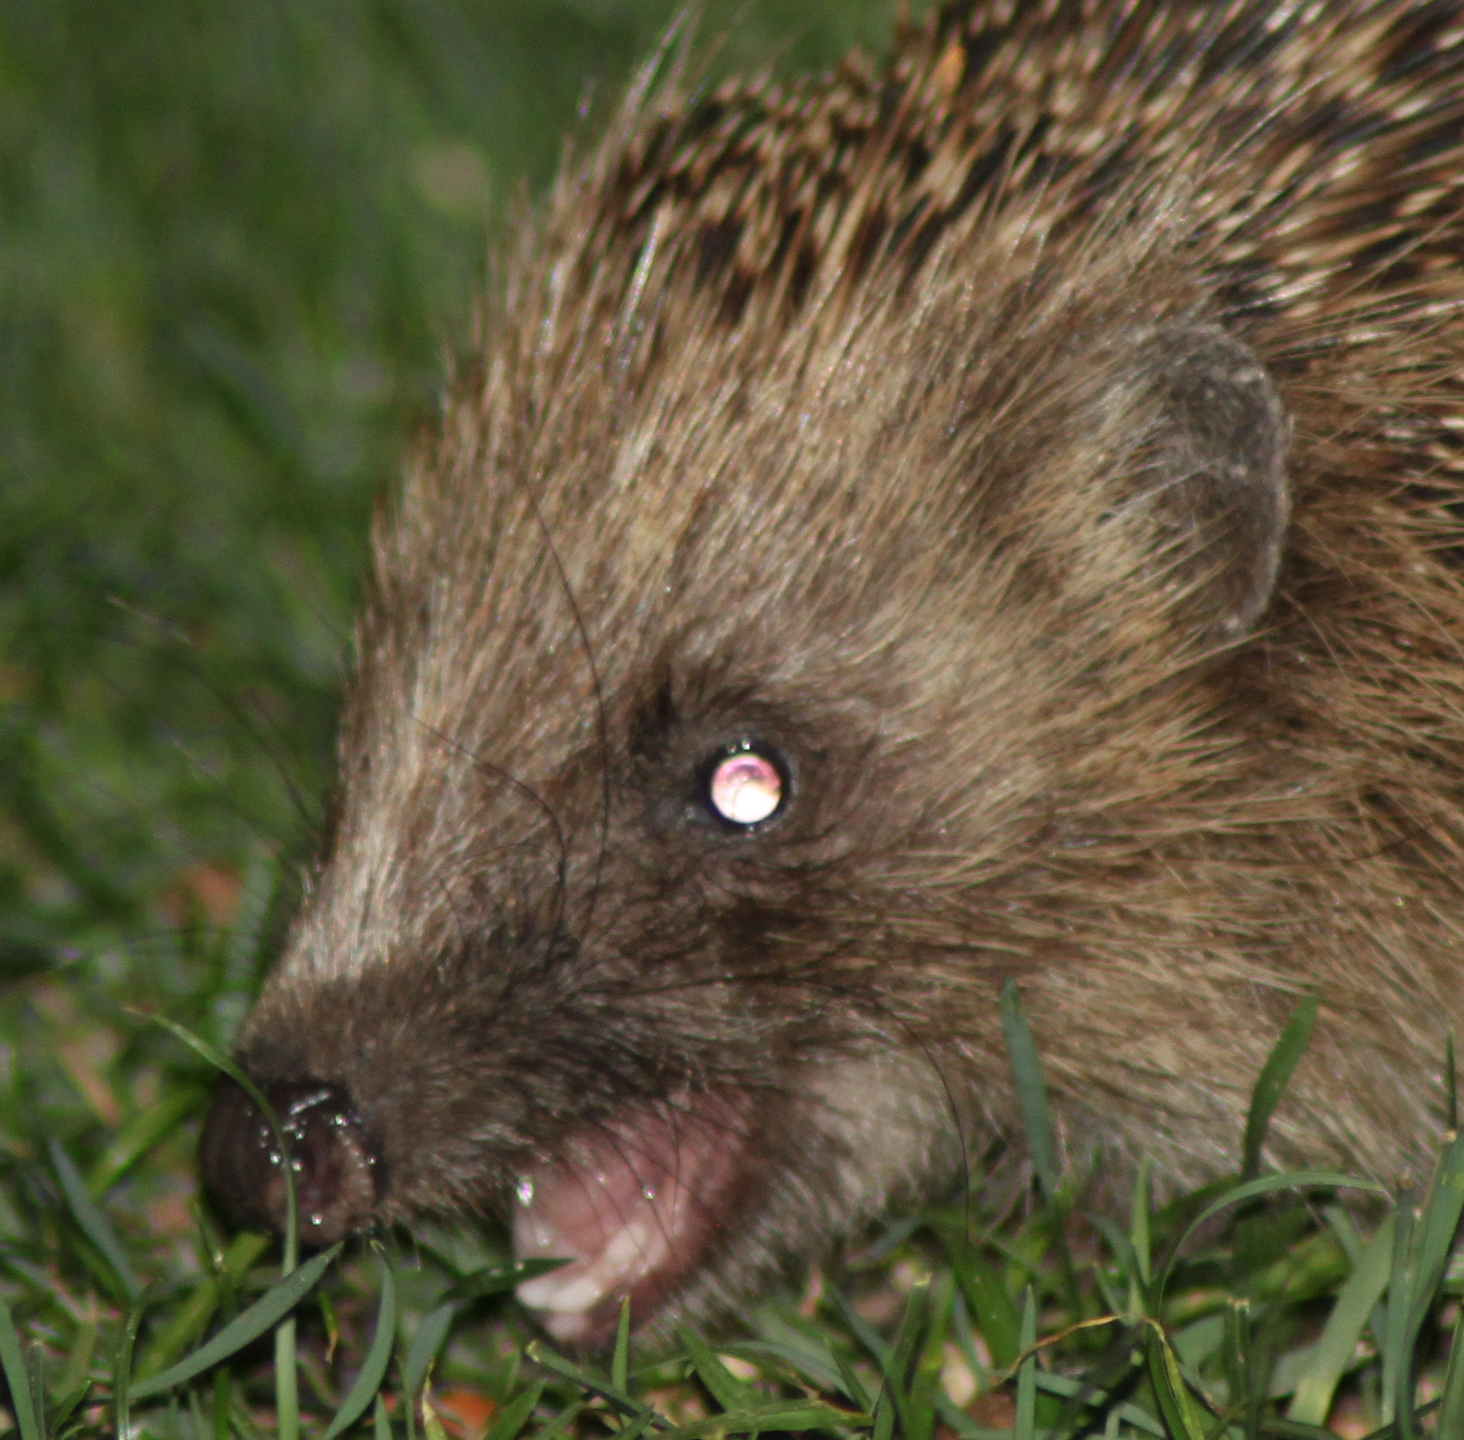 Roar! Well, not quite. Hedgehogs are mild mannered beasts